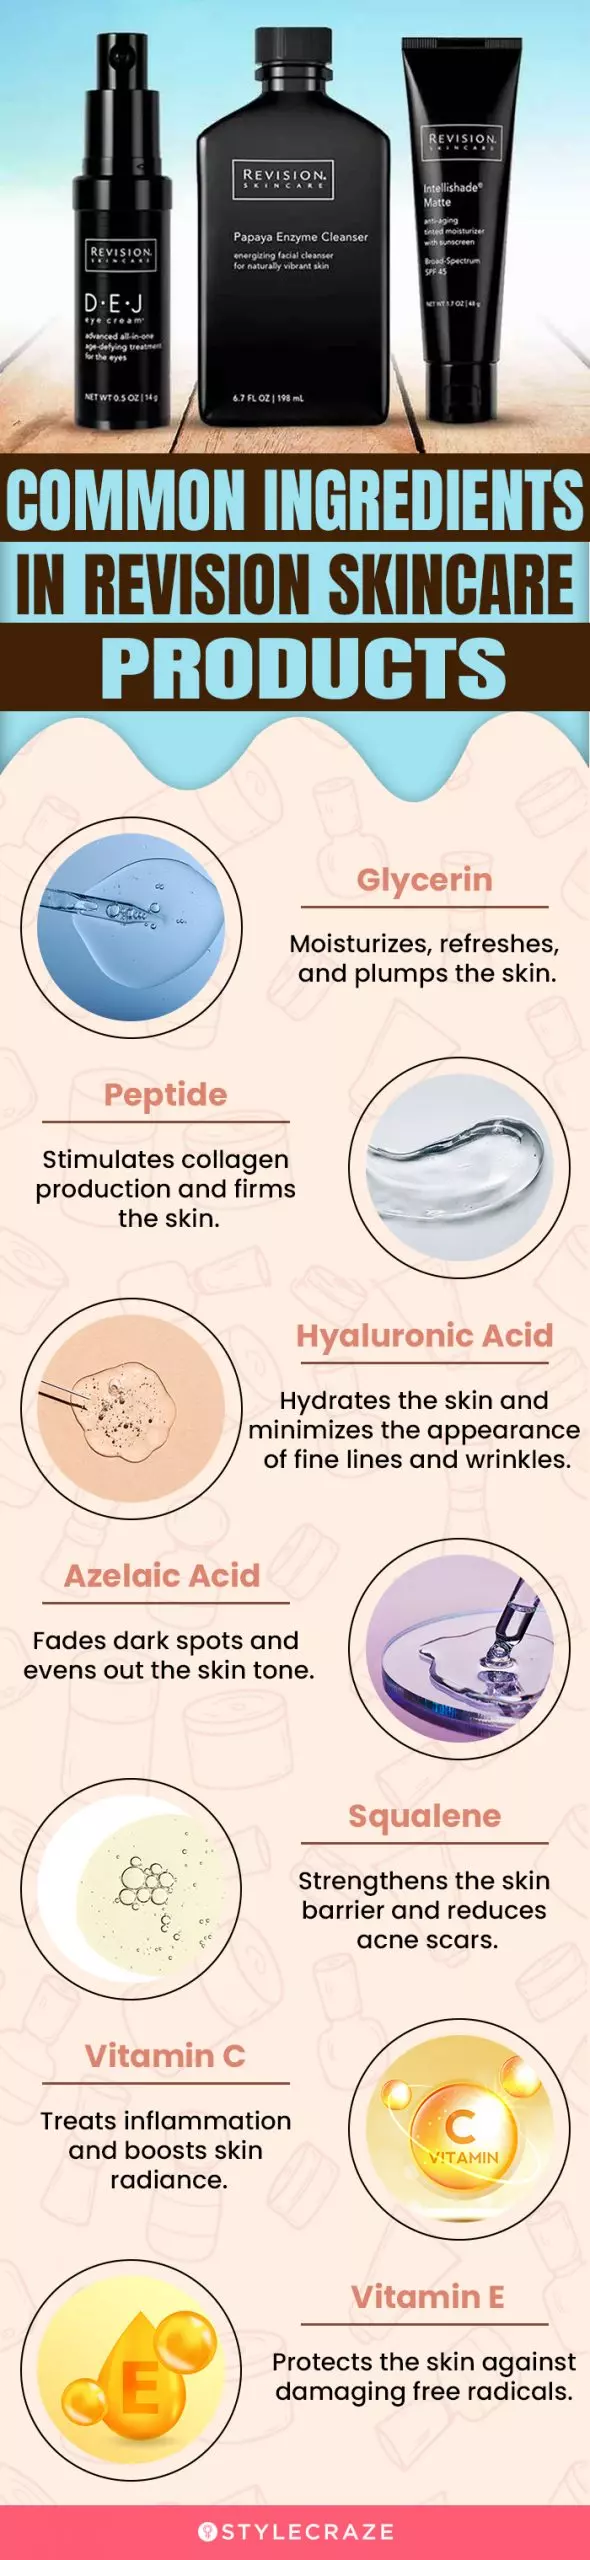 Common Ingredients In Revision Skincare Products (infographic)